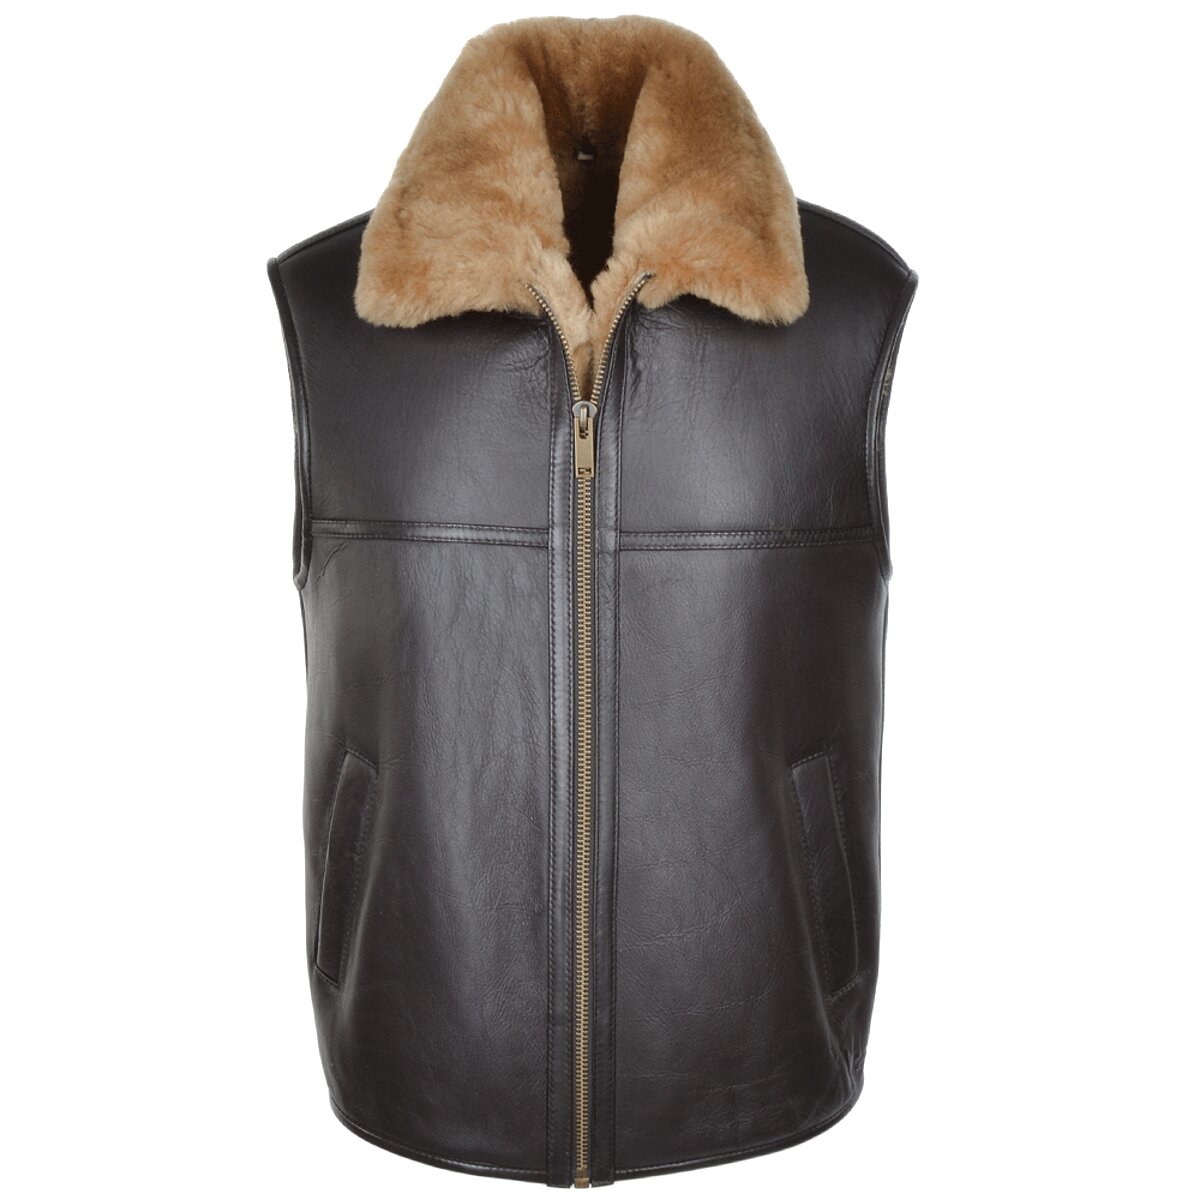 Leather Gillet for sale in UK | 49 used Leather Gillets